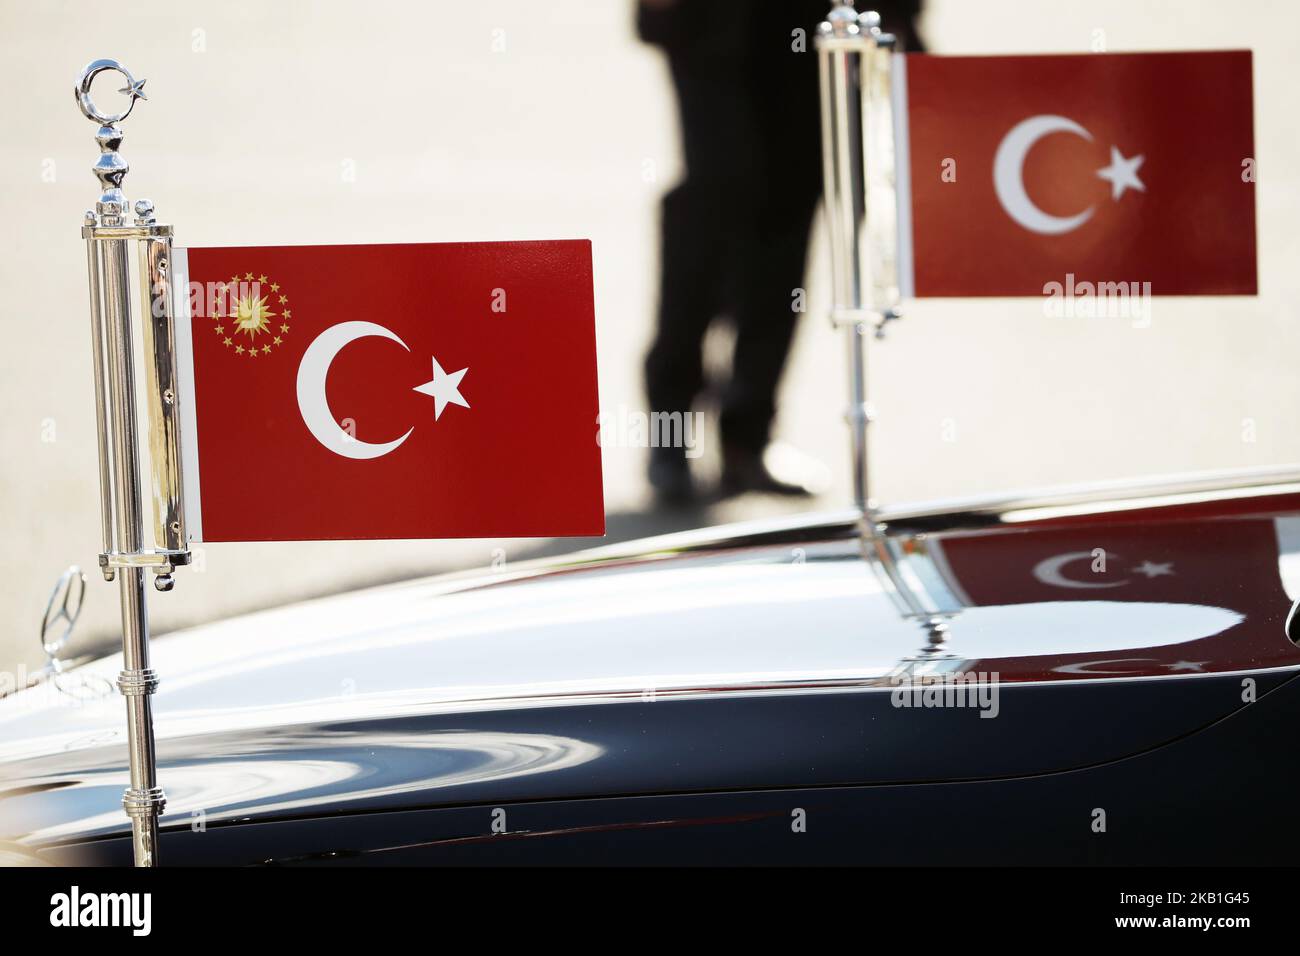 Turskish flags are pictured on the presidential car during the arrival of Turkish President Recep Tayyip Erdogan and his wife Emine at Tegel airport in Berlin, Germany on September 27, 2018. Erogan will be on official visit in Germany from September 27 to 29, 2018. (Photo by Emmanuele Contini/NurPhoto) Stock Photo